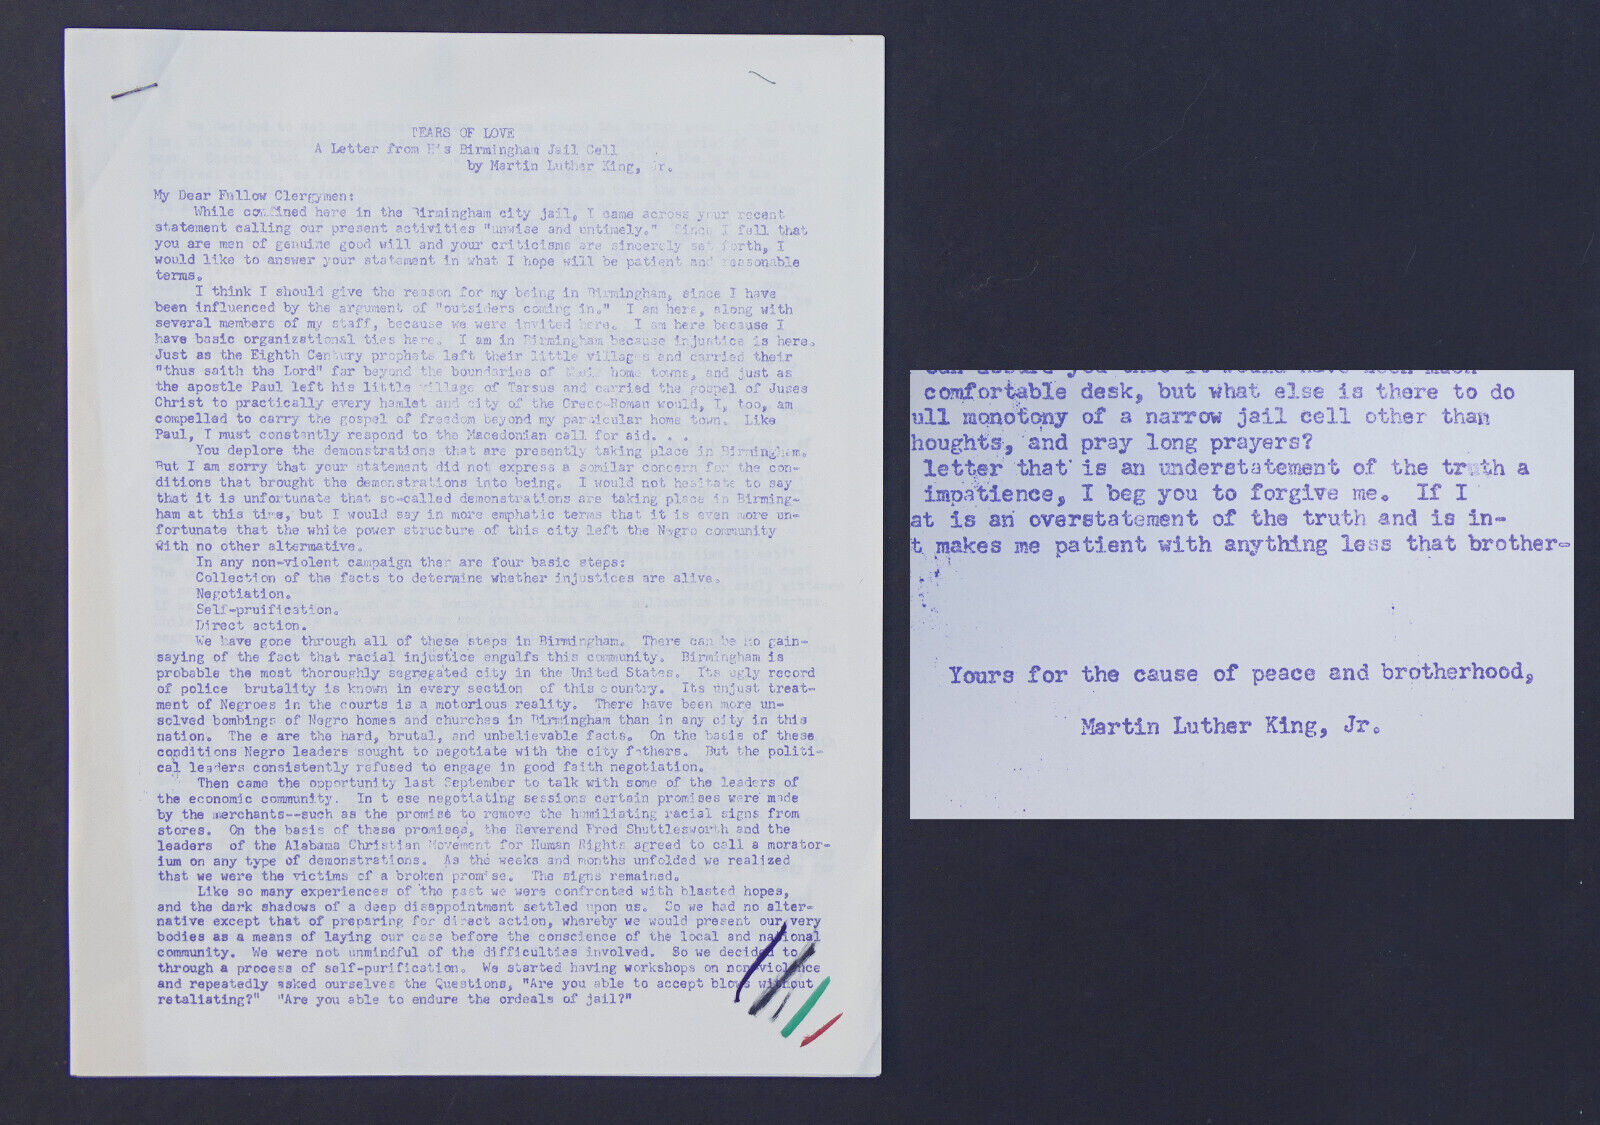 c.1963 Dr. Martin Luther King Typed Copy Letter From Birmingham Jail Cell - EP1